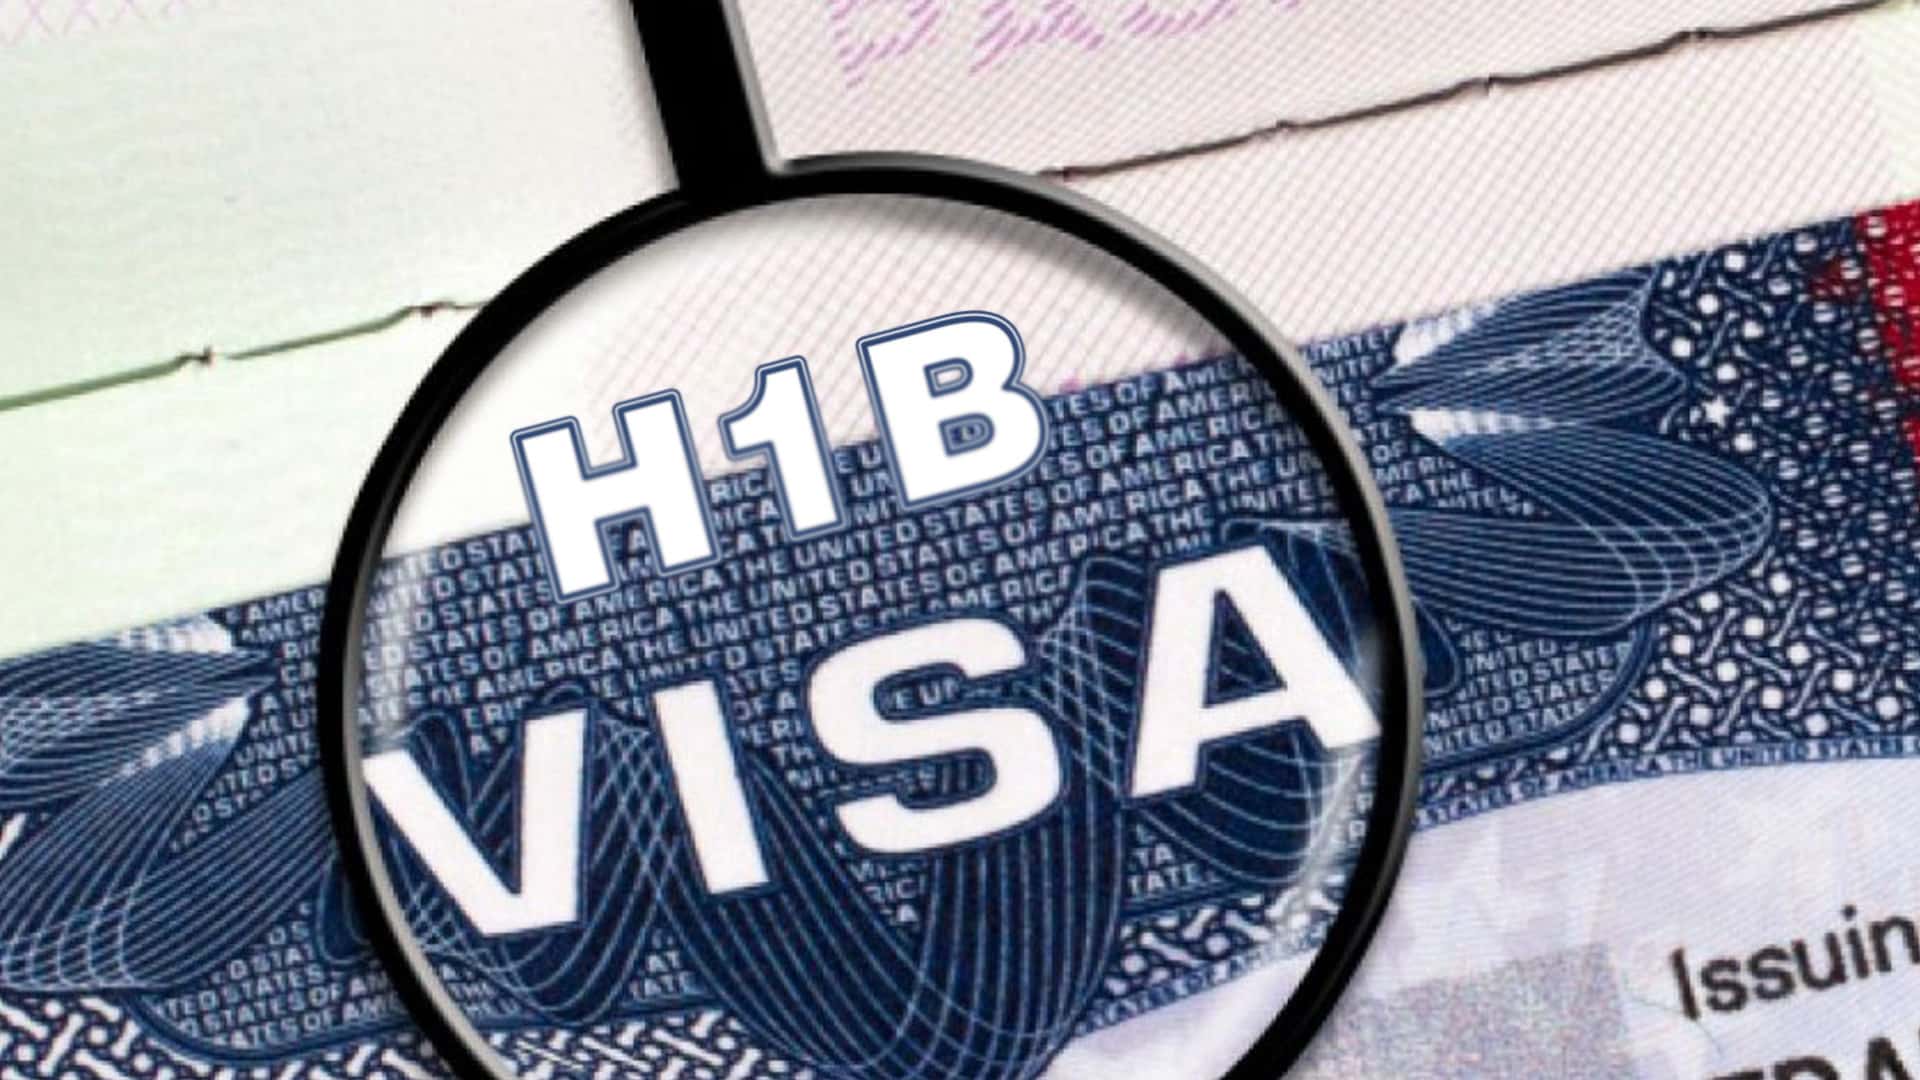 Presidential advisory panel recommends extending grace period for retrenched H-1B workers to 180 days